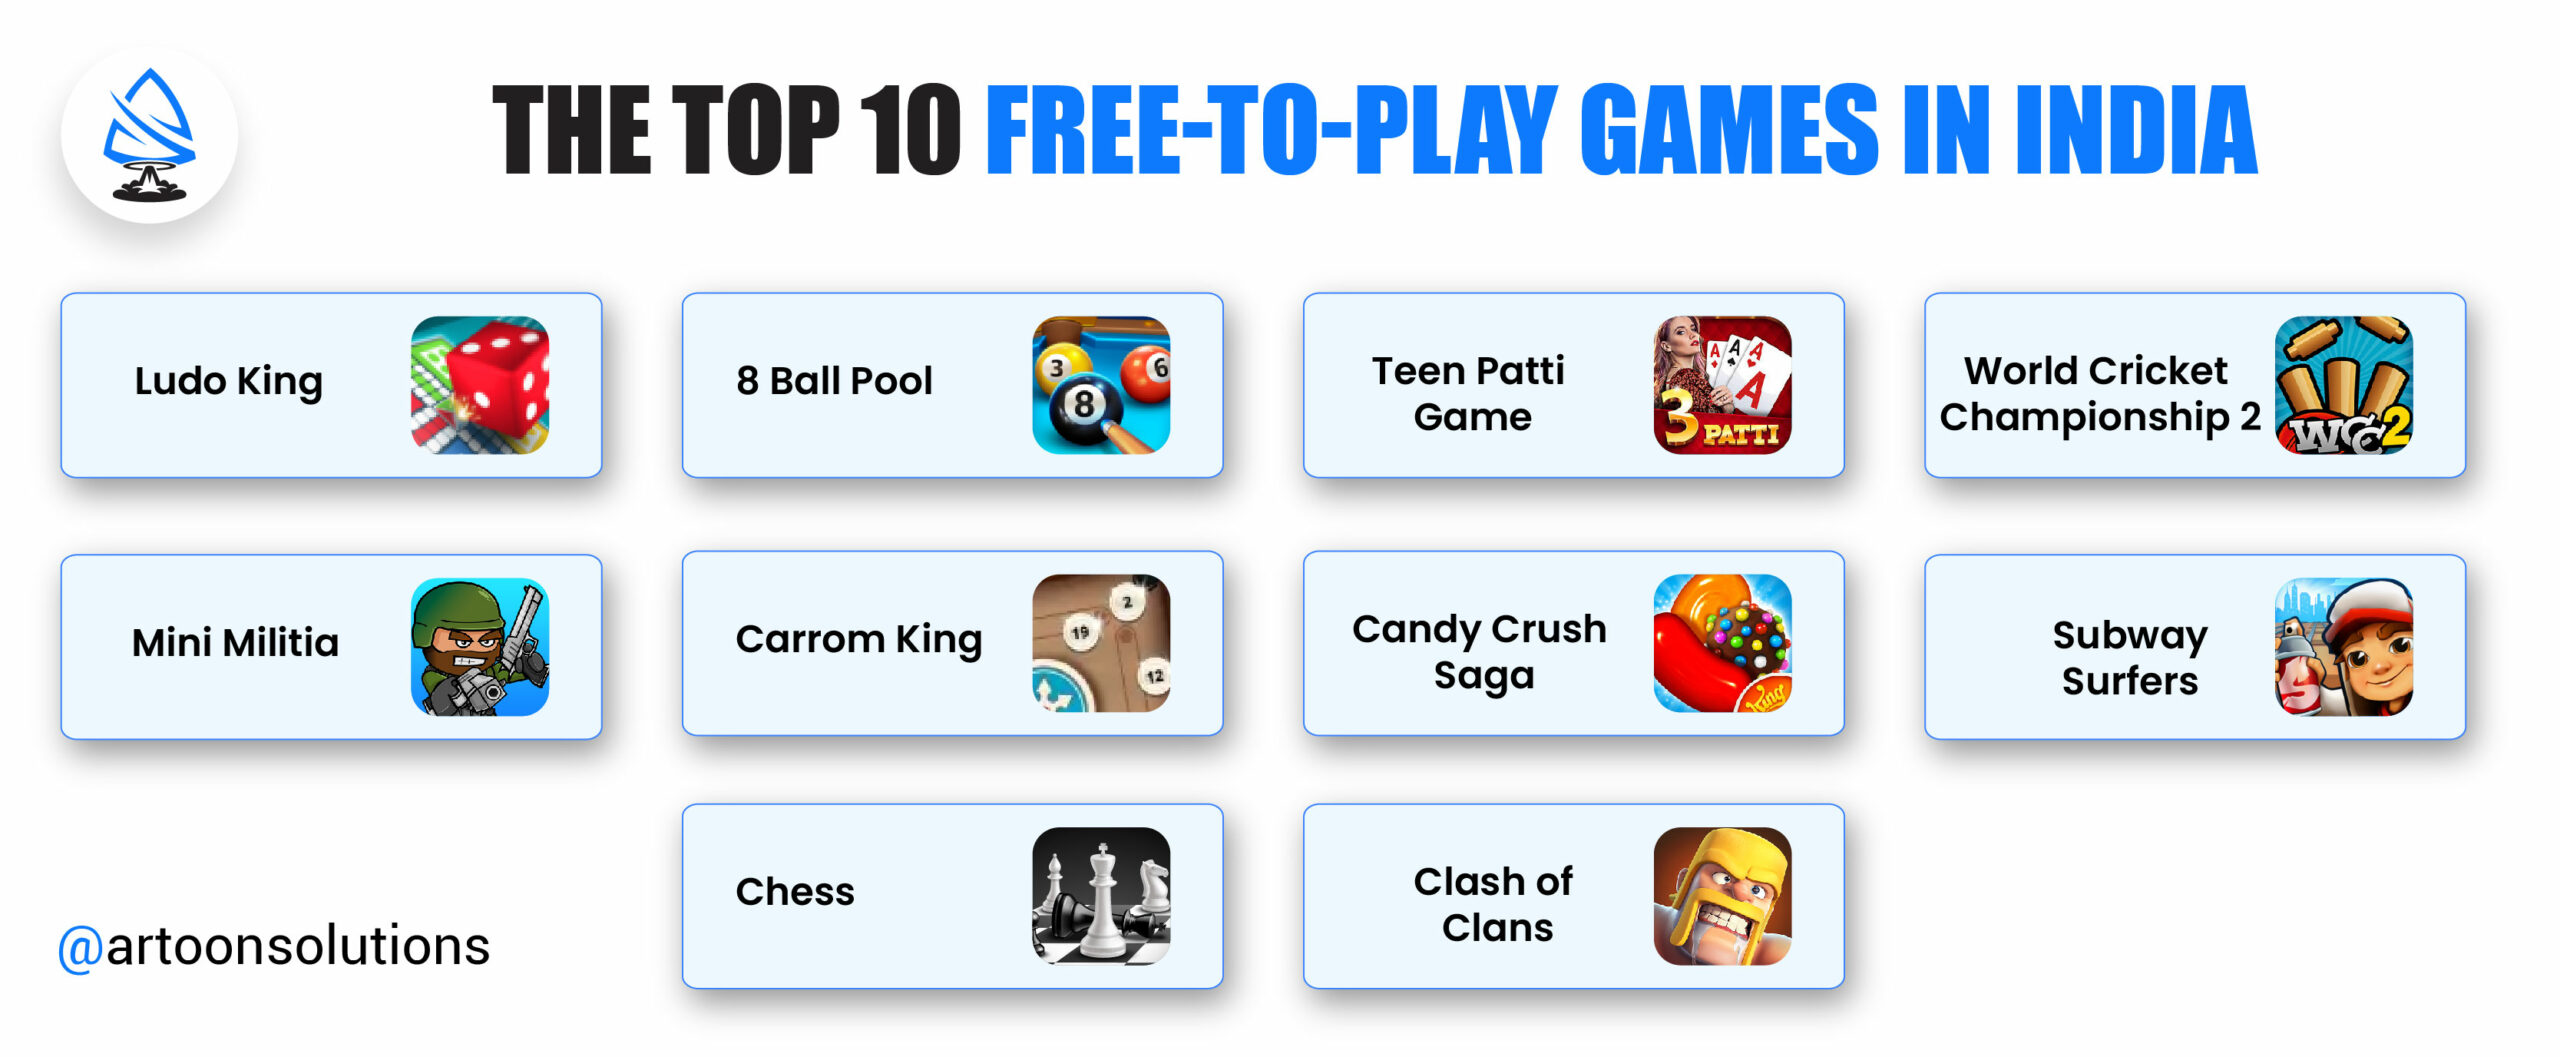 The Top 10 Free-to-play Games in India